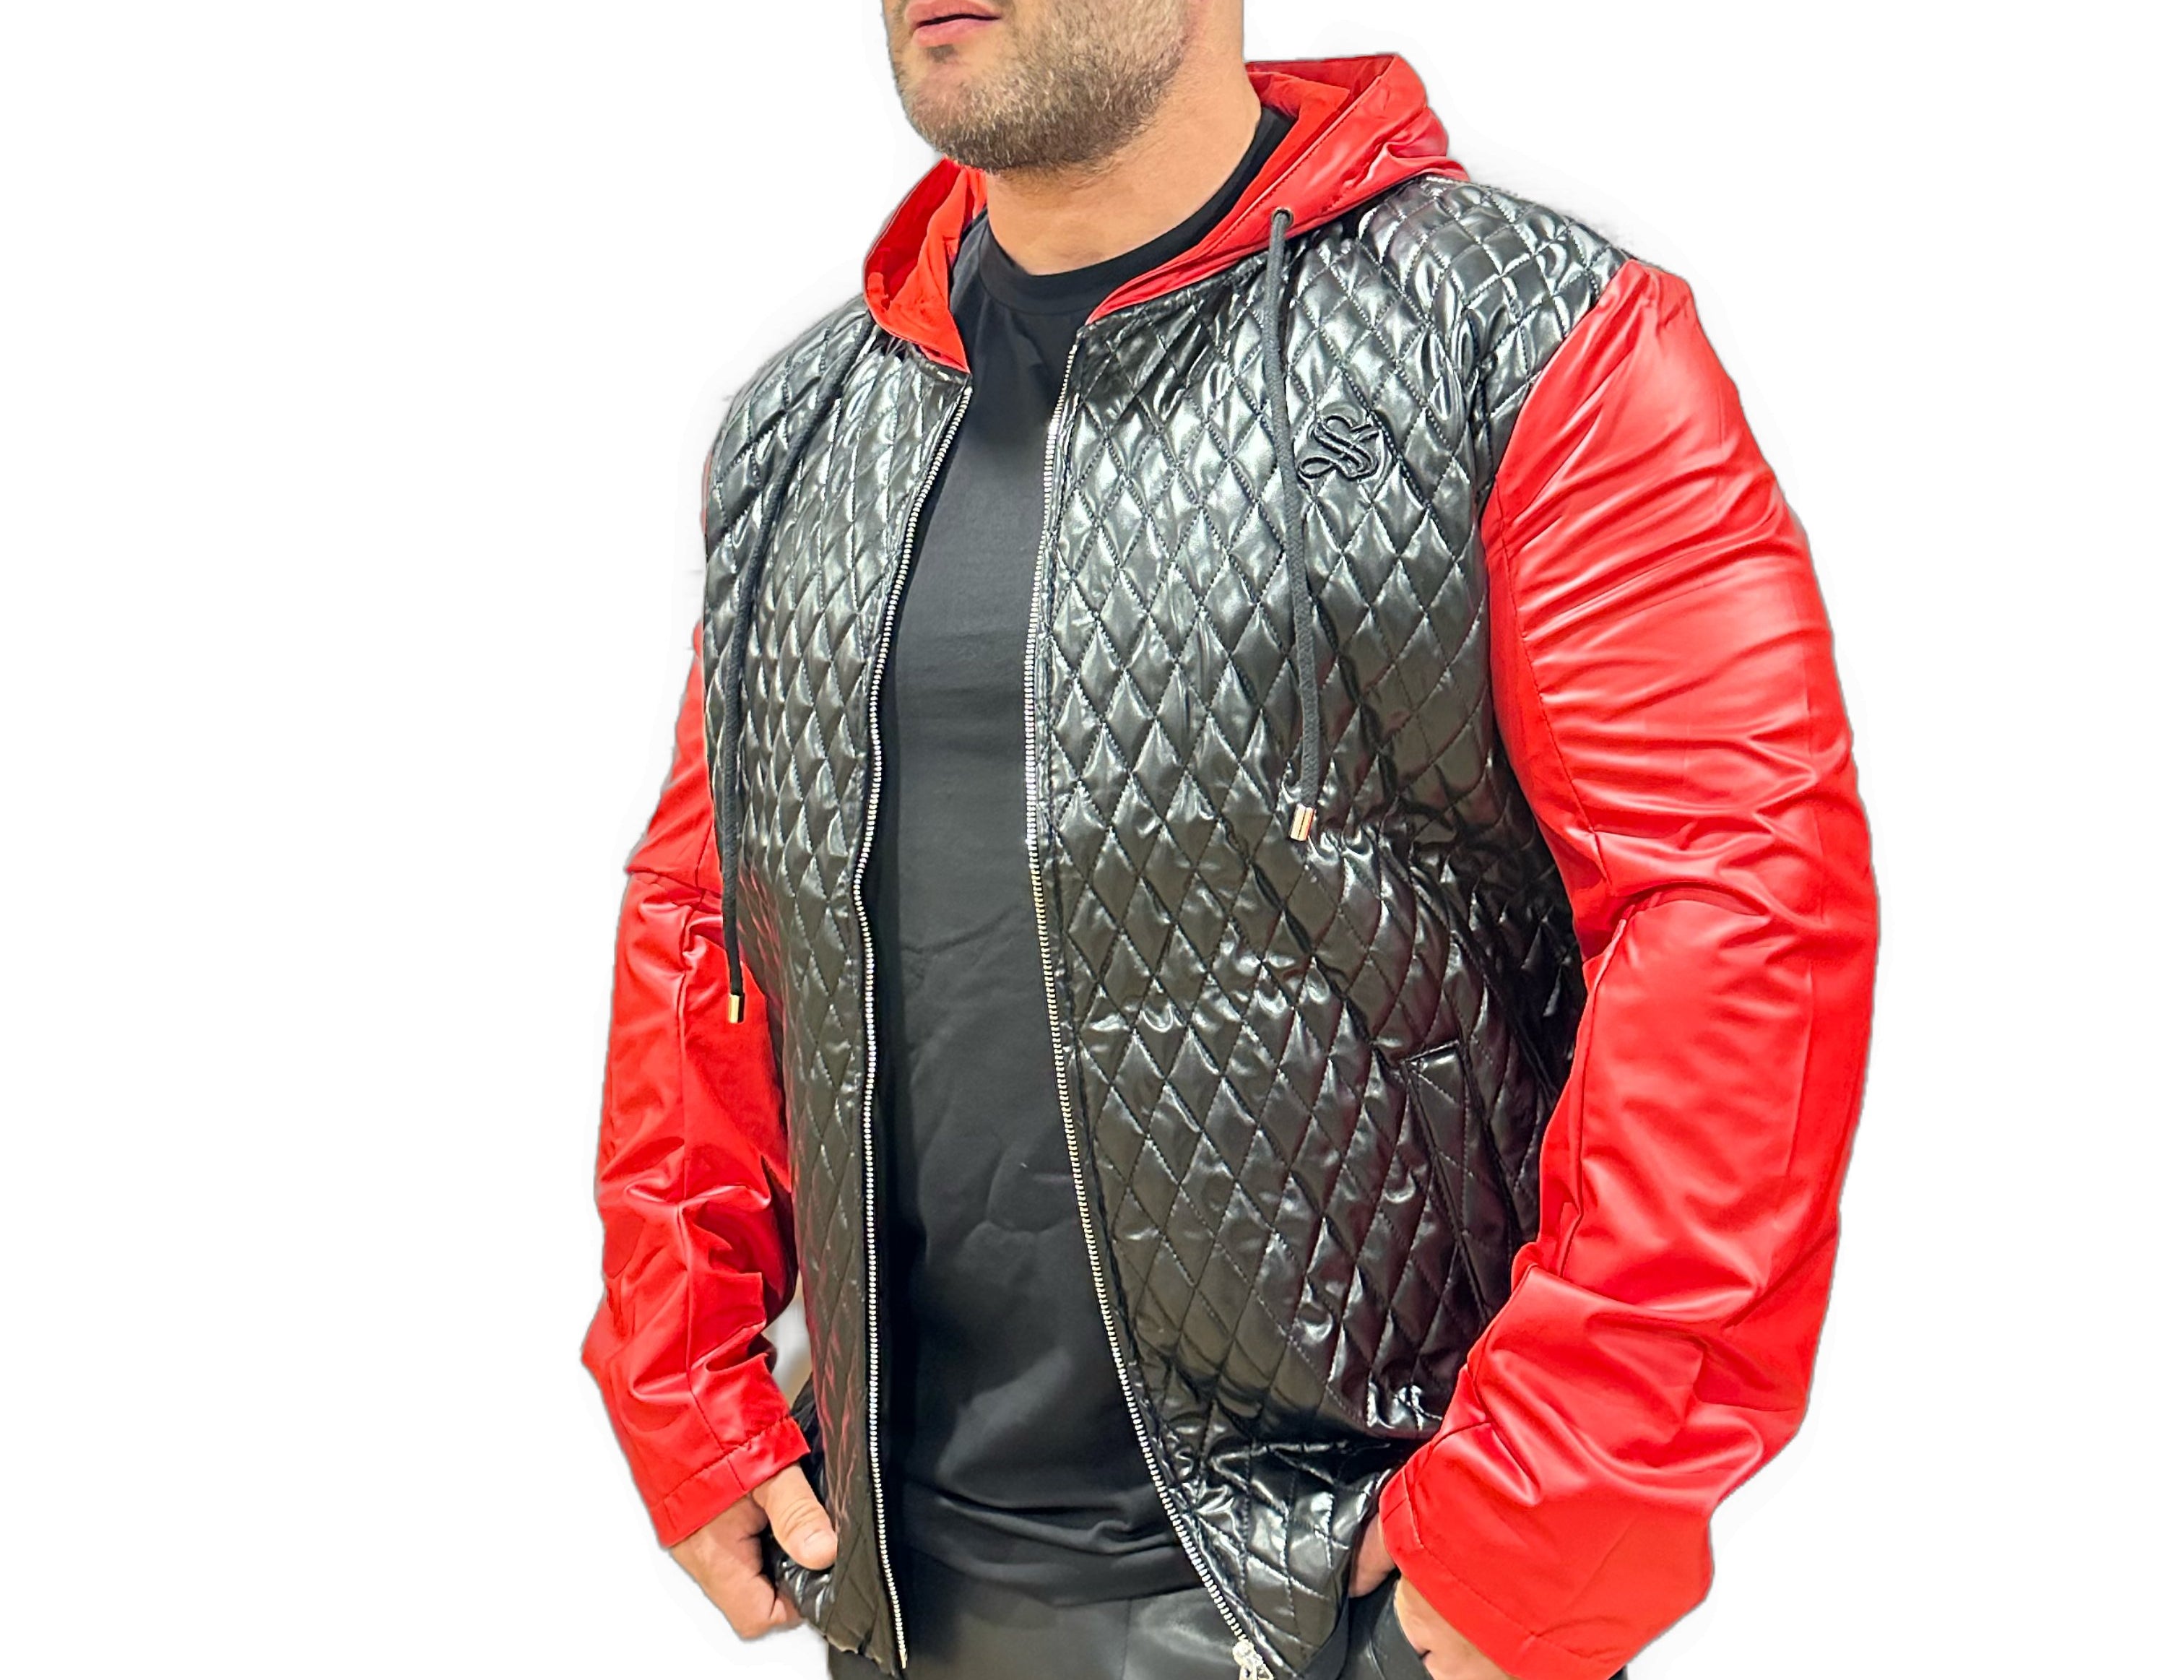 Robin 3 - Black/Red Jacket for Men - Sarman Fashion - Wholesale Clothing Fashion Brand for Men from Canada